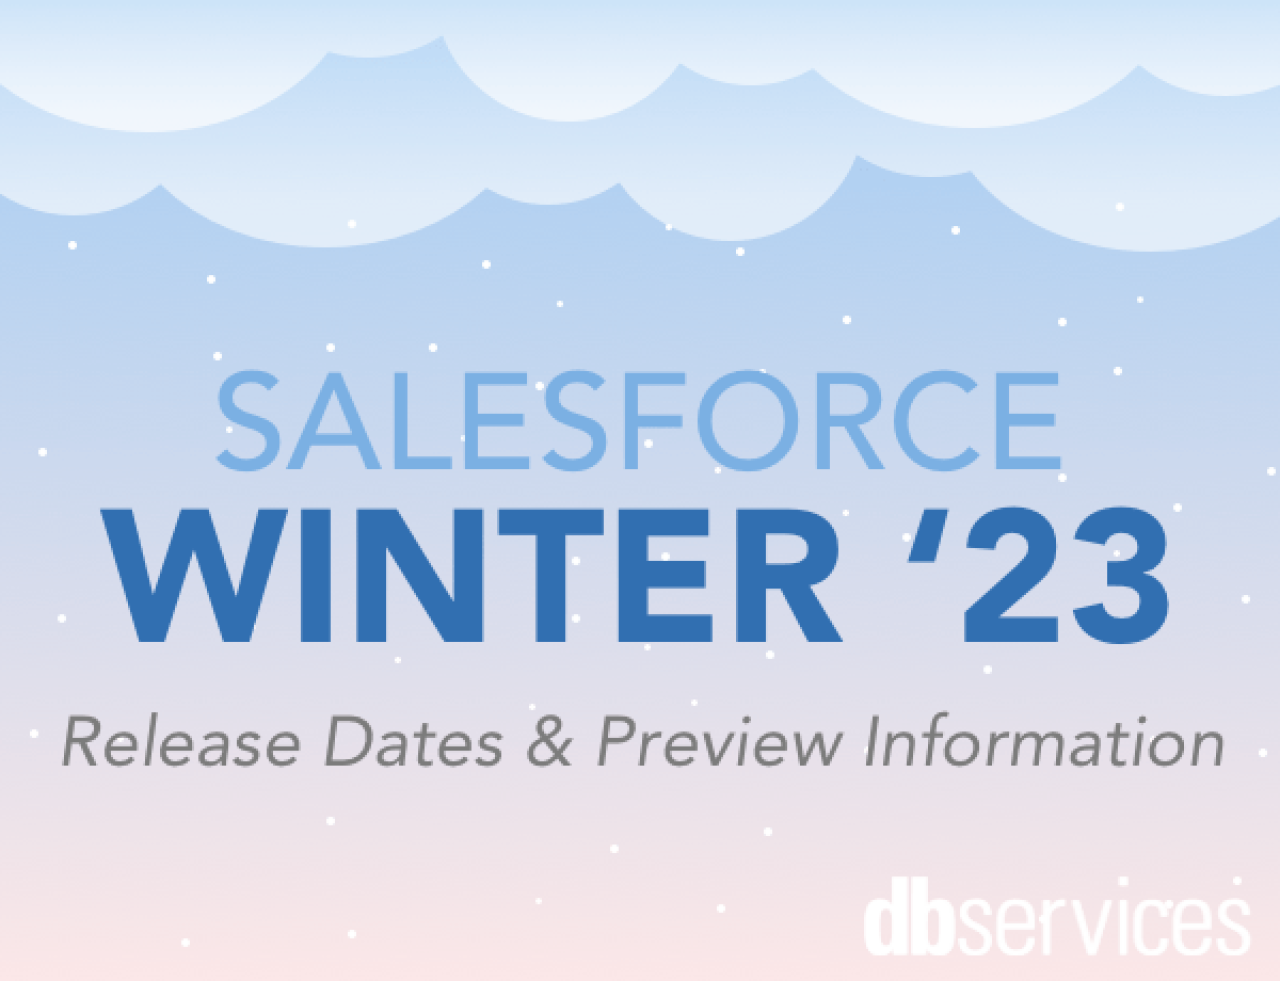 salesforce winter 23 release dates and preview information.